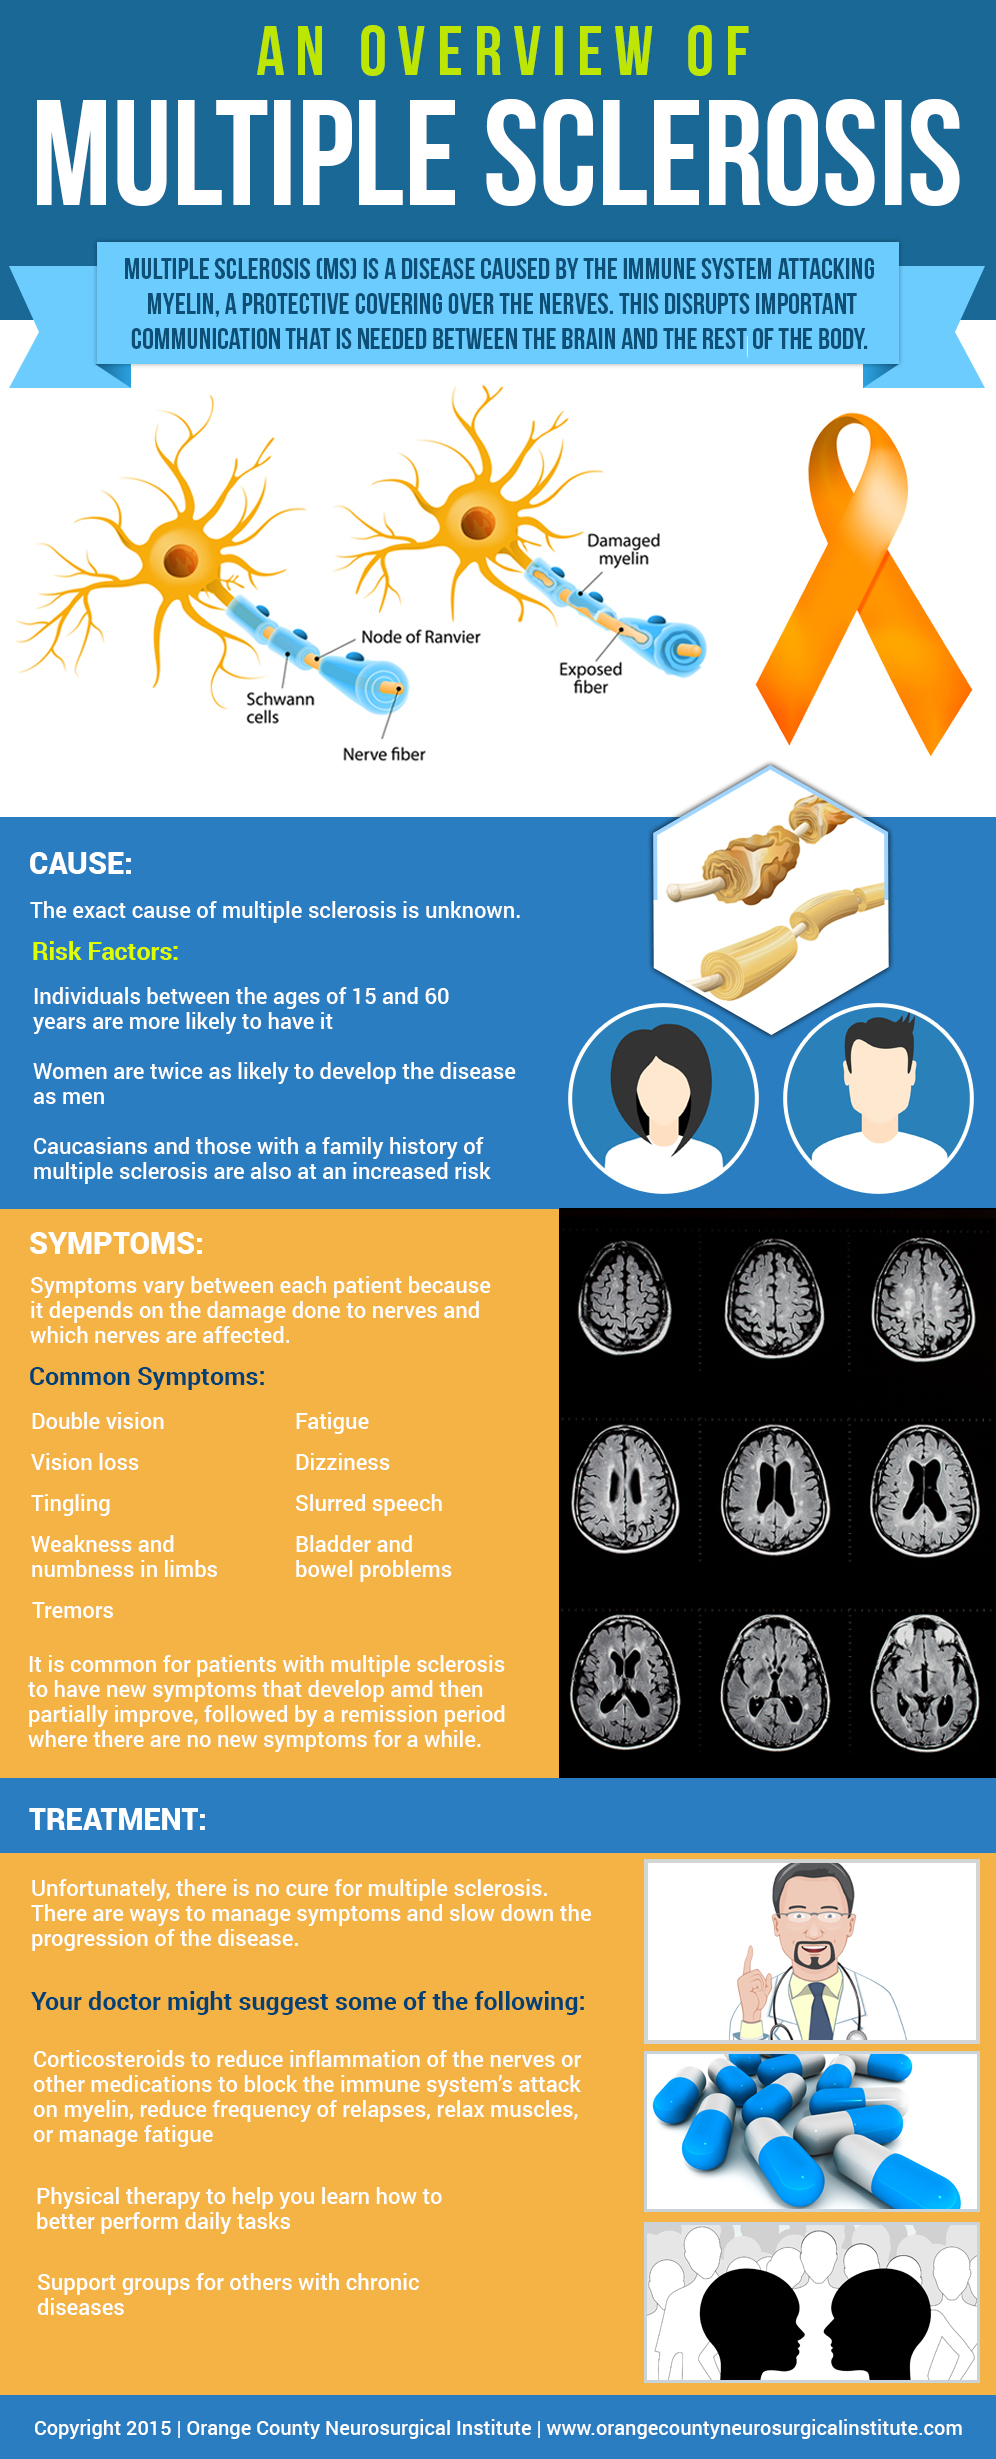 An Overview of Multiple Sclerosis by Orange County Neurosurgical Institute - An Overview of Multiple Sclerosis